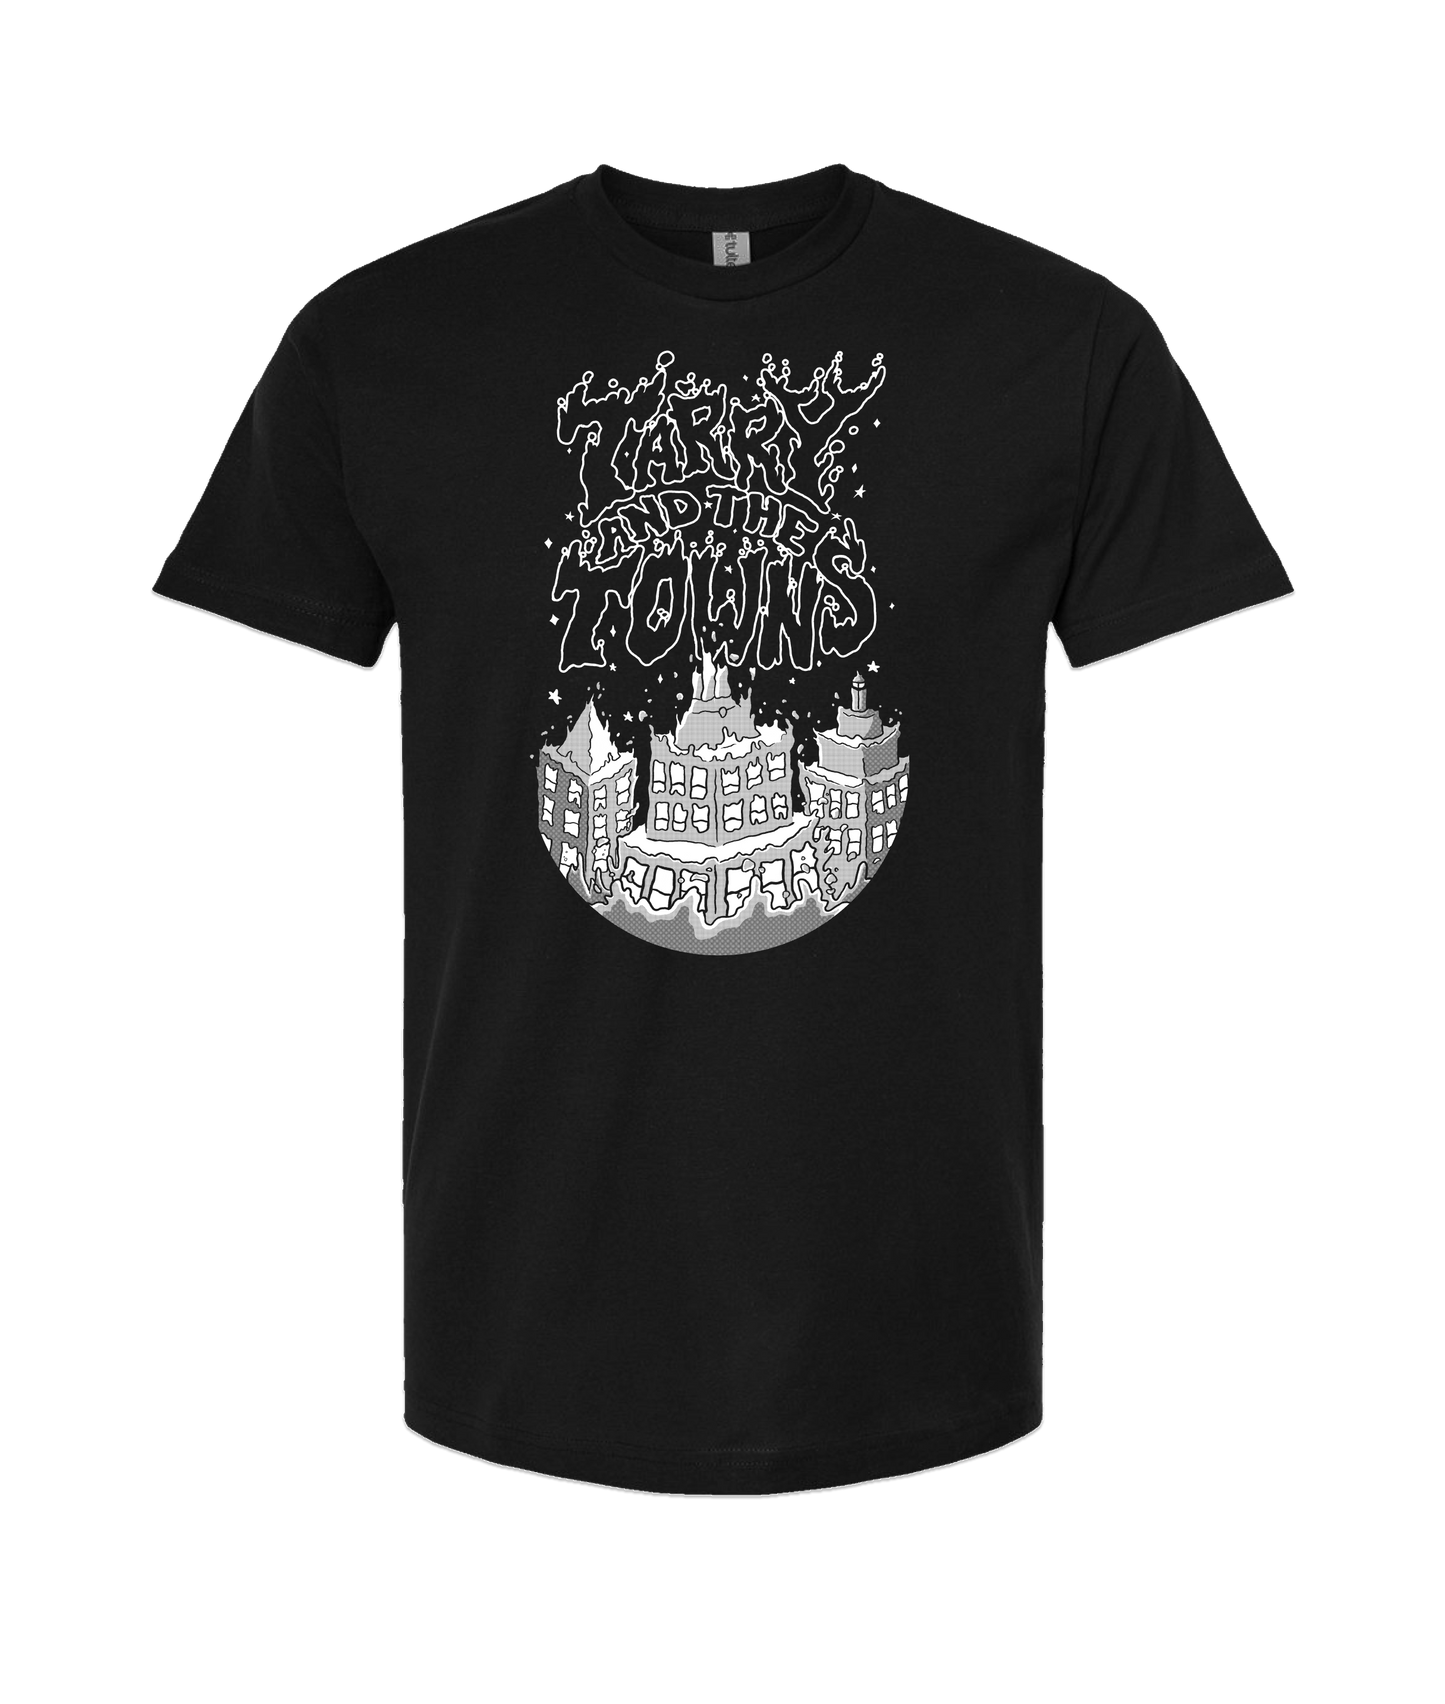 Tarry and the Towns - Inky - Black T-Shirt